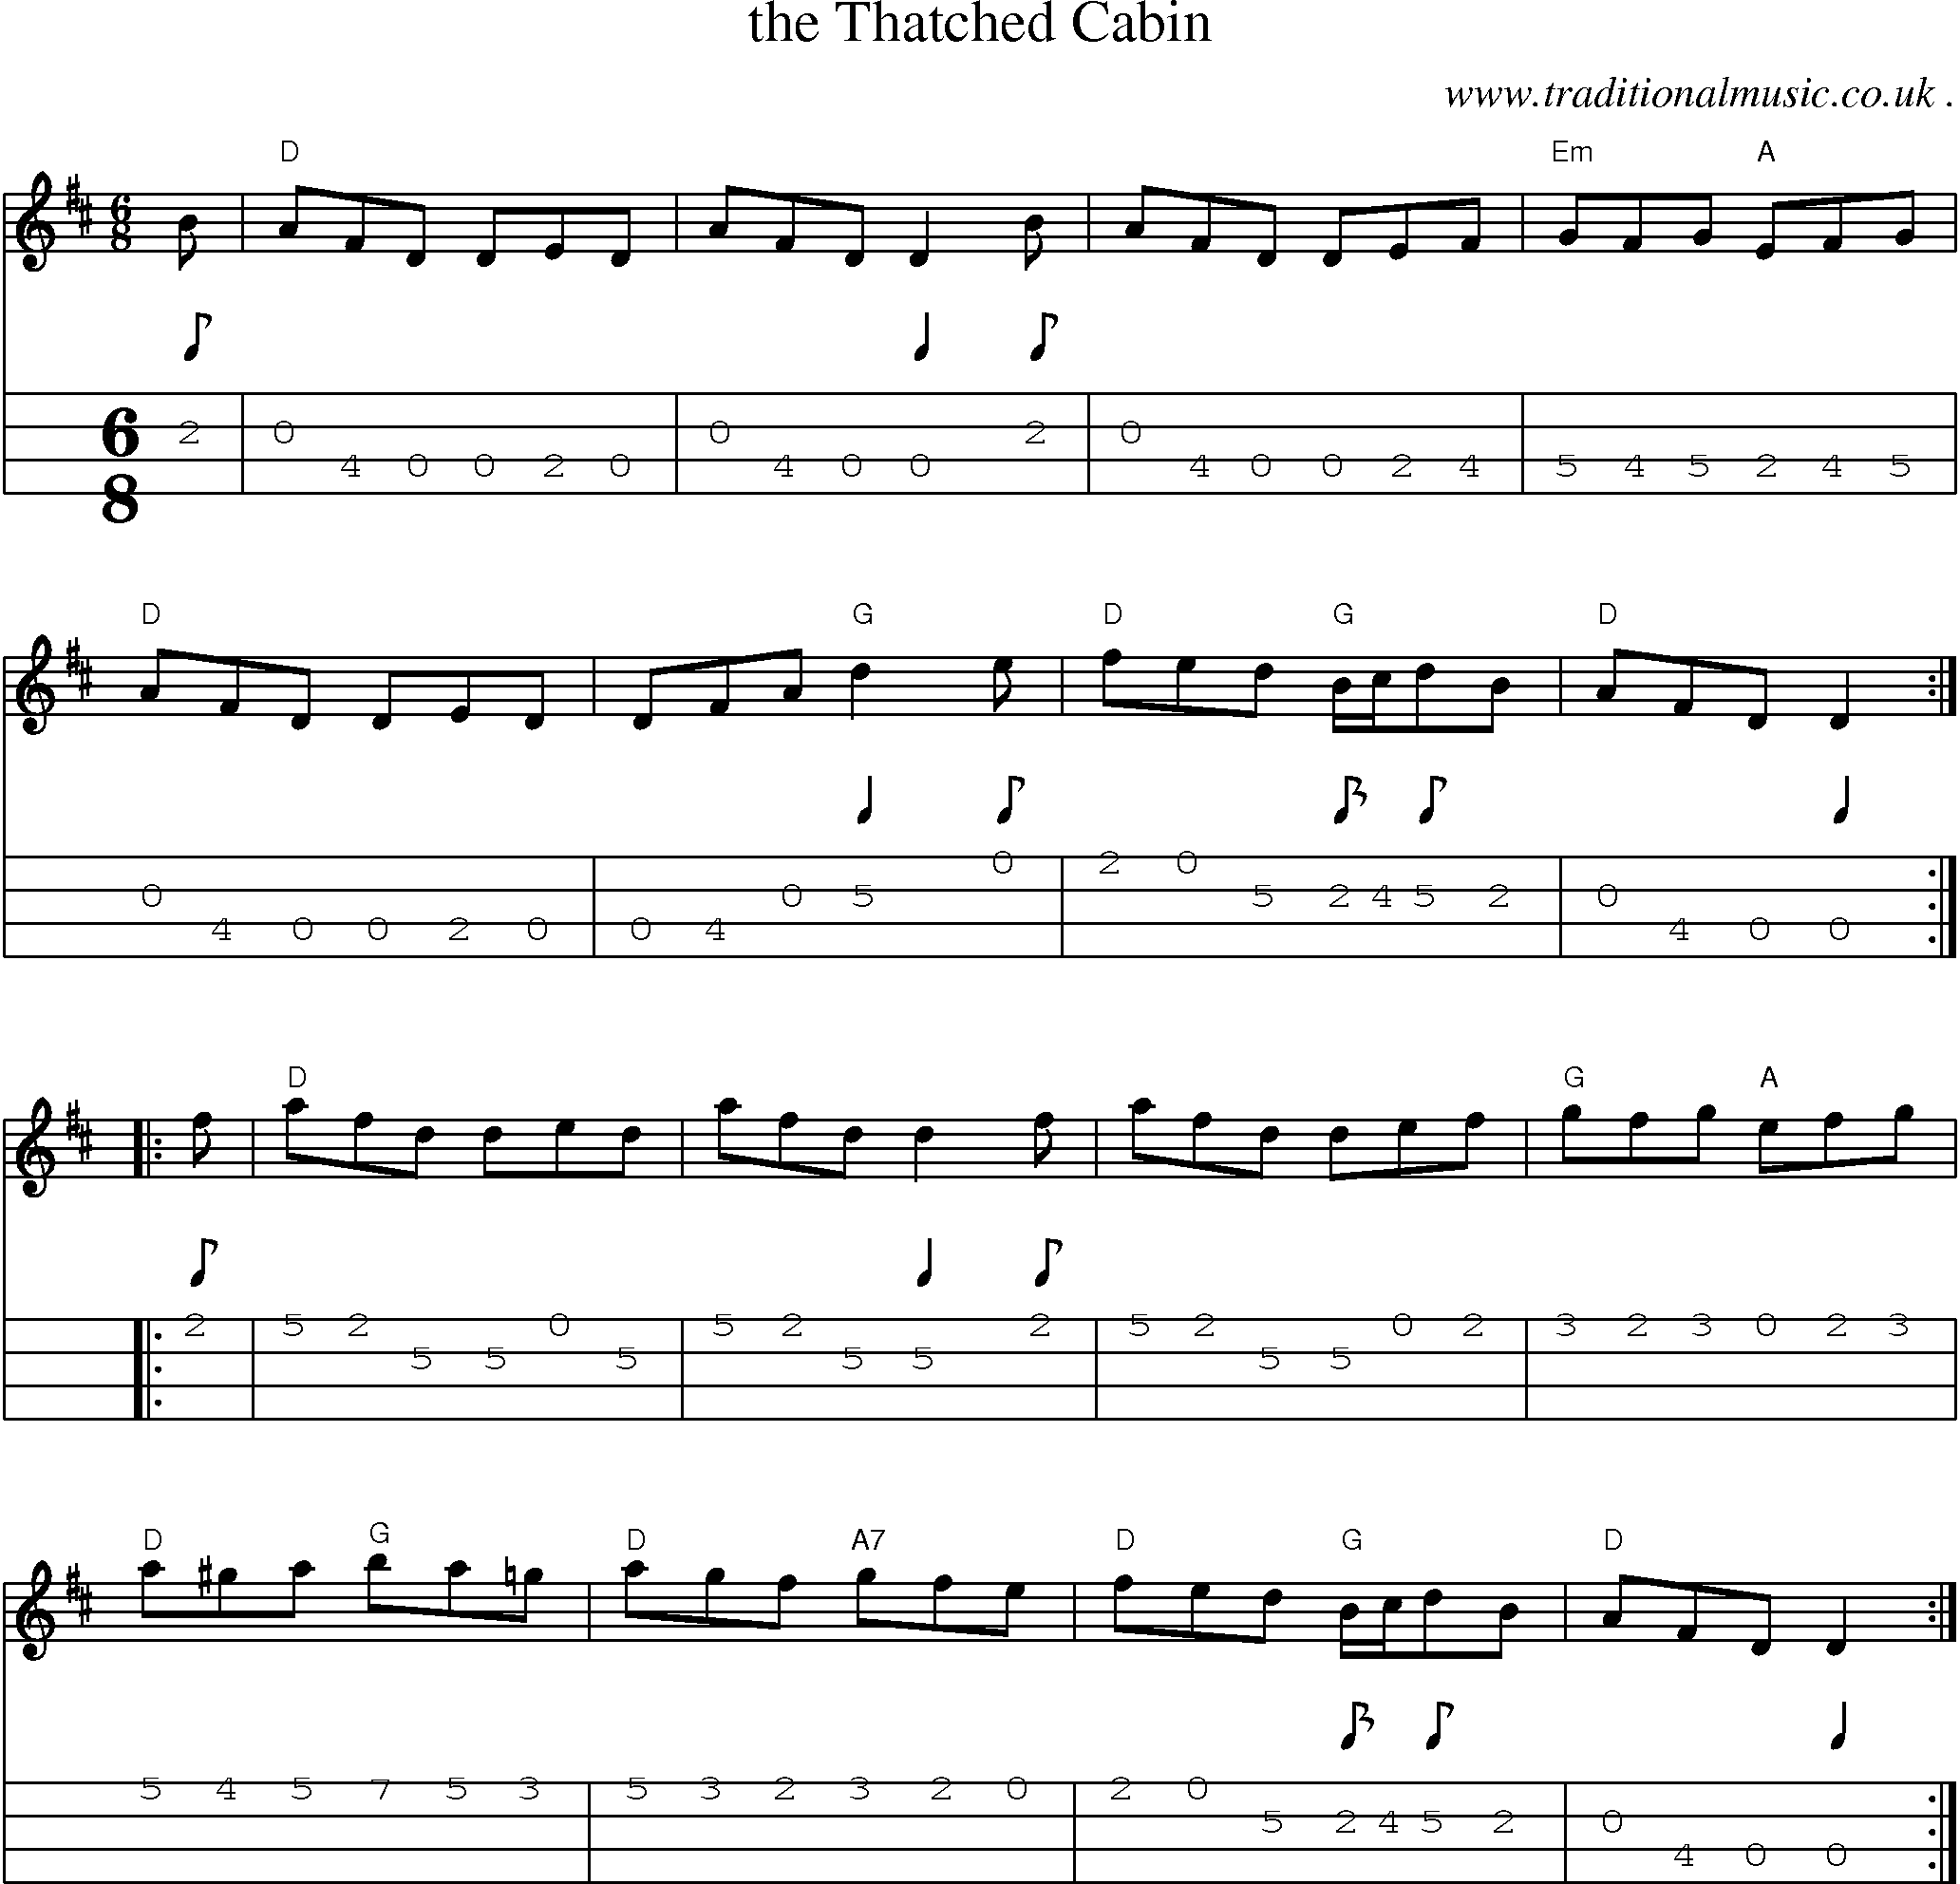 Sheet-music  score, Chords and Mandolin Tabs for The Thatched Cabin